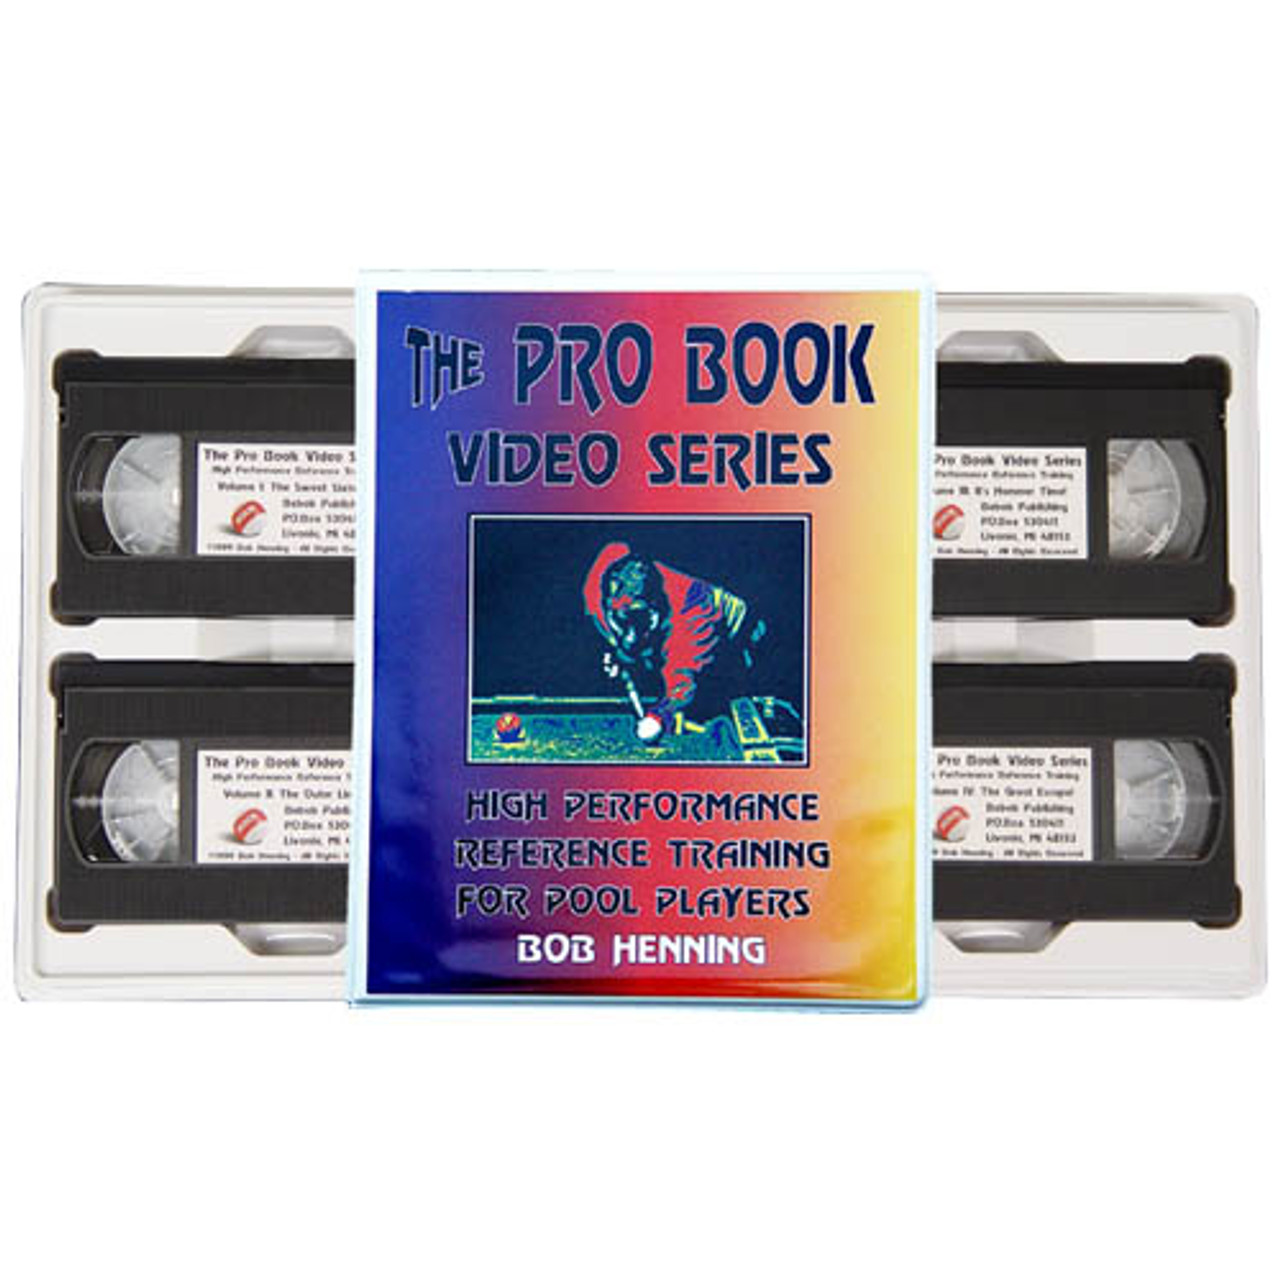 The Pro Book Video Series